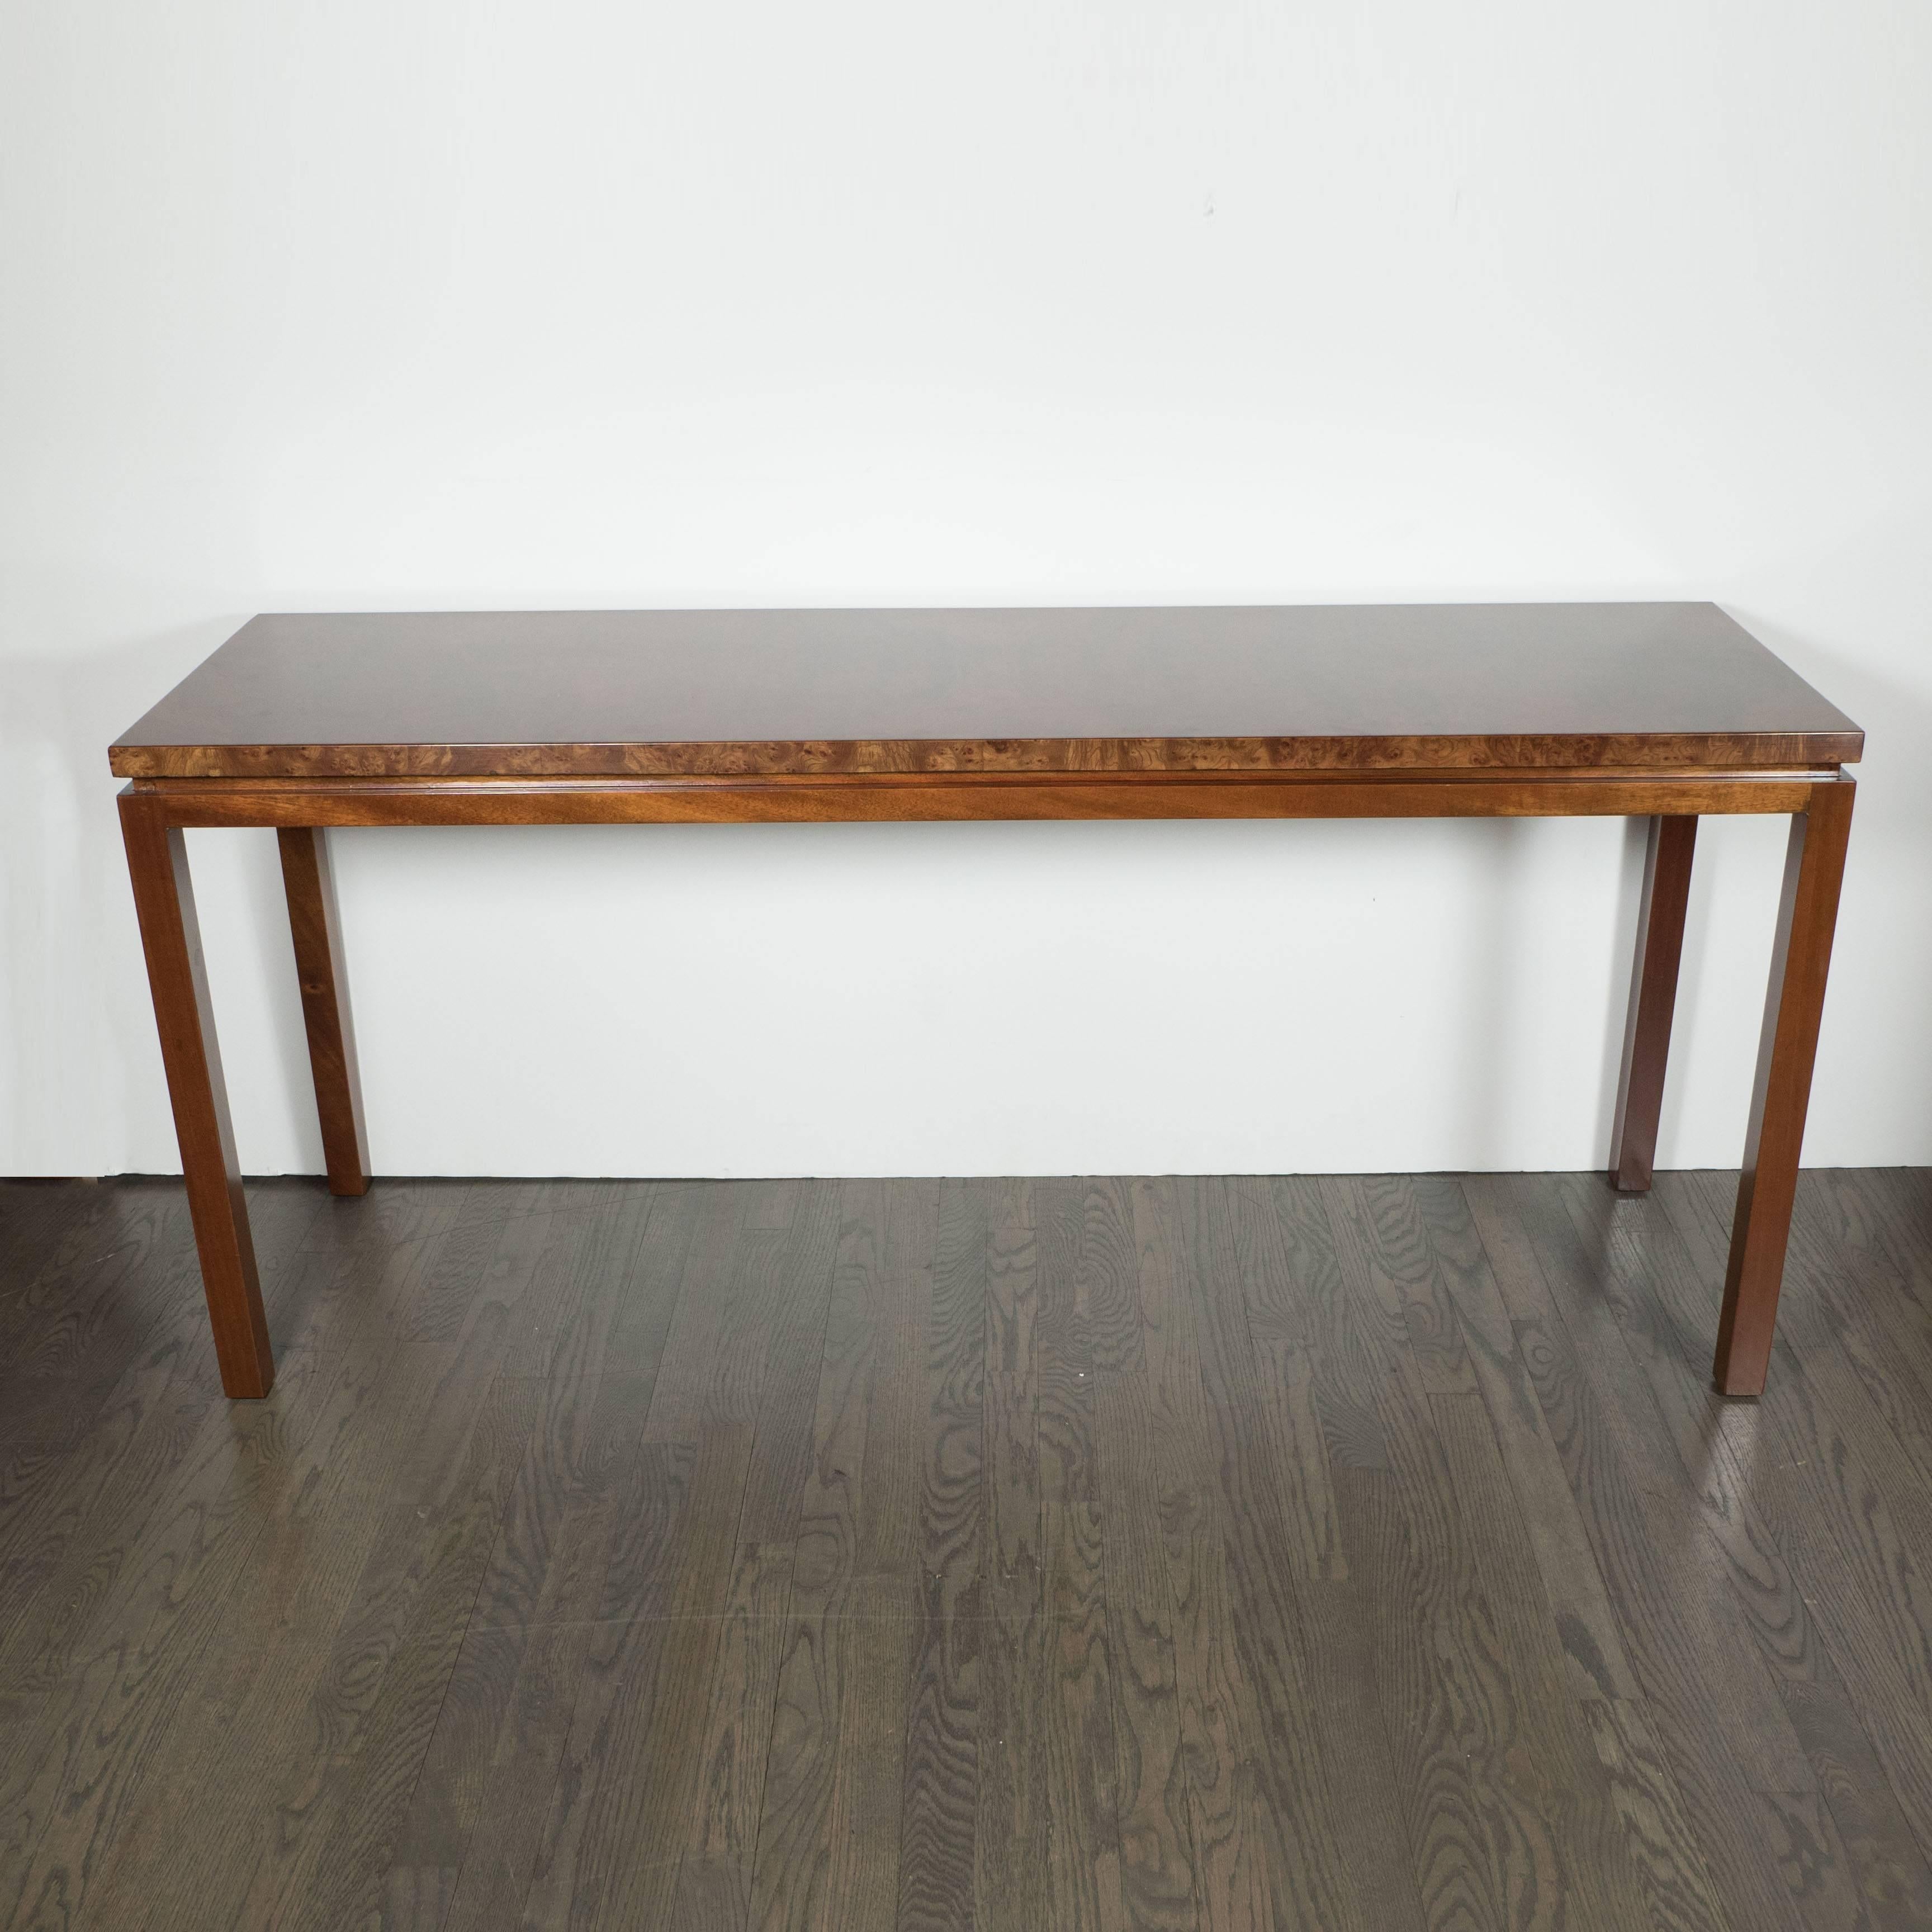 An ultra-chic Mid-Century Parsons console in bookmatched Carpathian elm by Harvey Probber, American, circa 1970.
Stylish design by Harvey Probber with original label on the underside of the tabletop. The tabletop in exquisite hand-rubbed